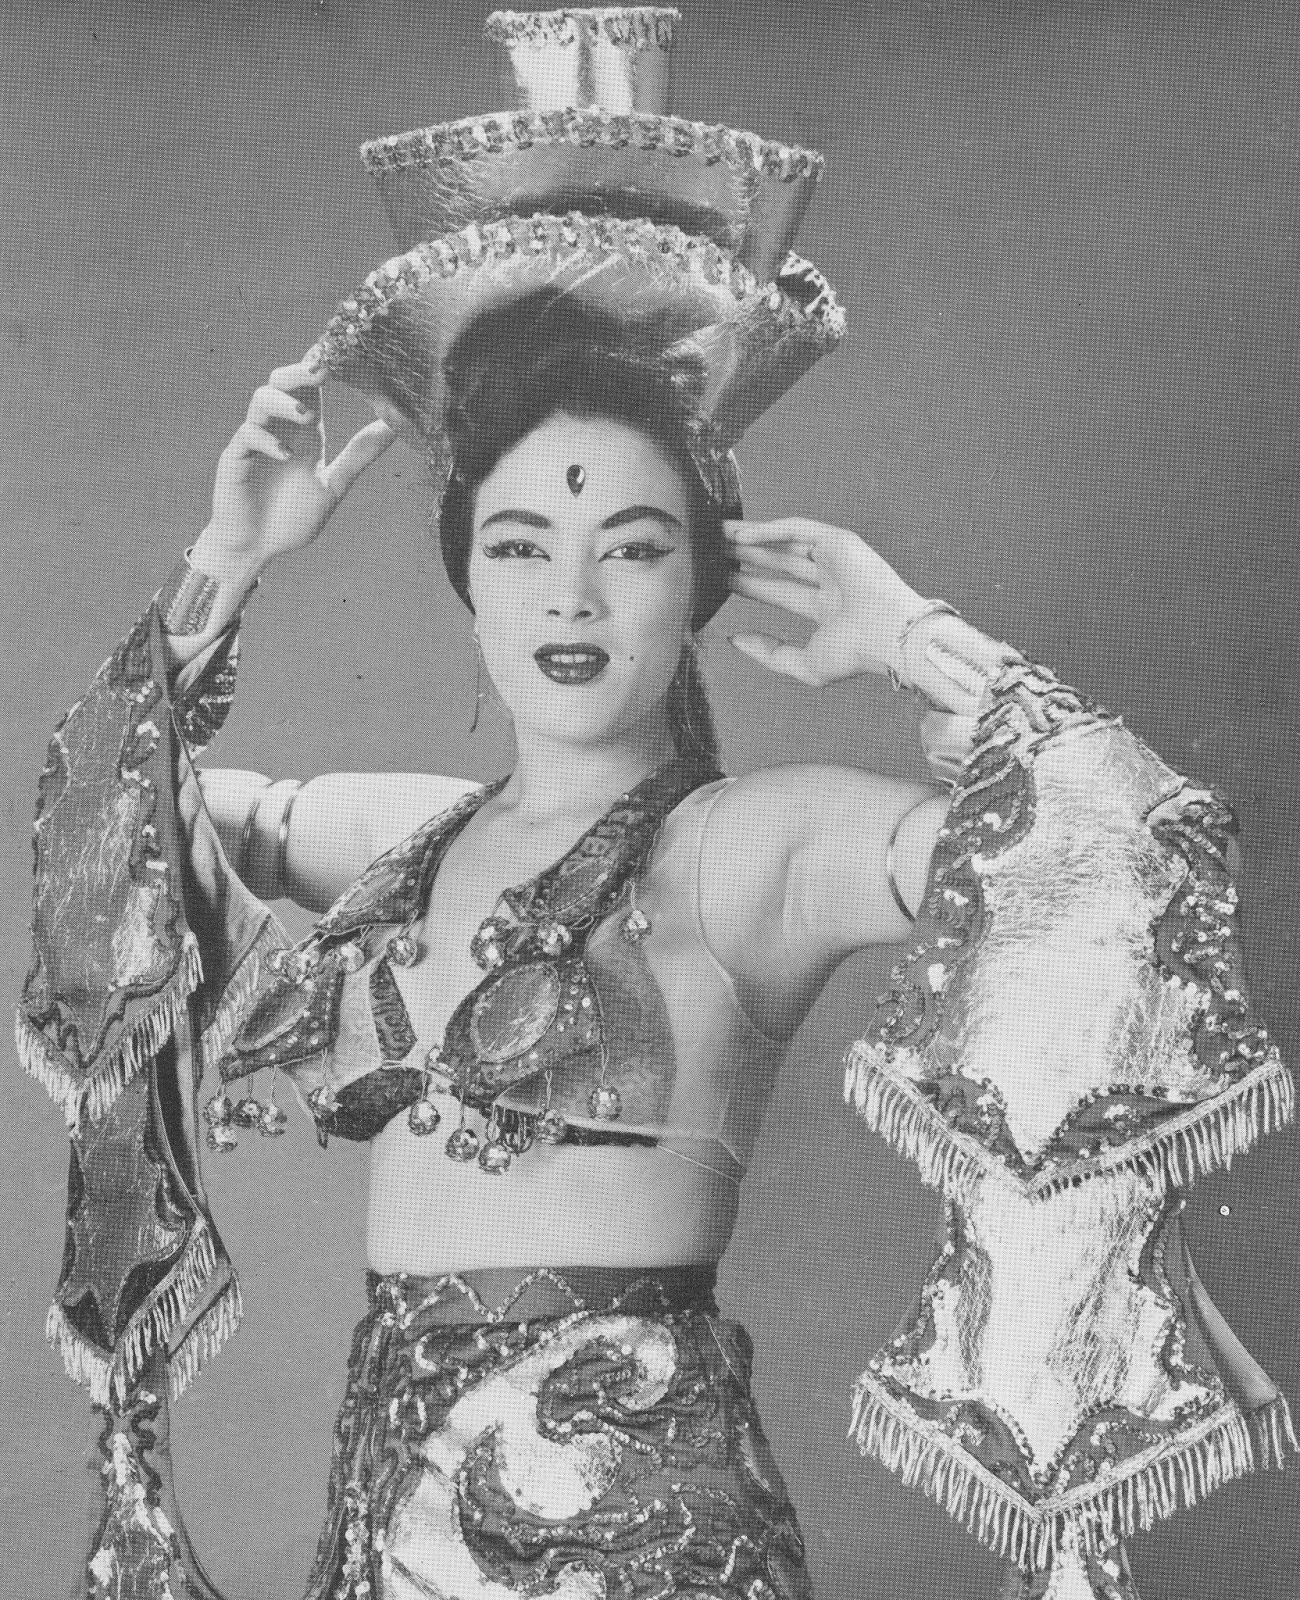 PHOTOS OF TURA SATANA YOU NEVER THOUGHT YOU WOULD SEE True Burlesque.